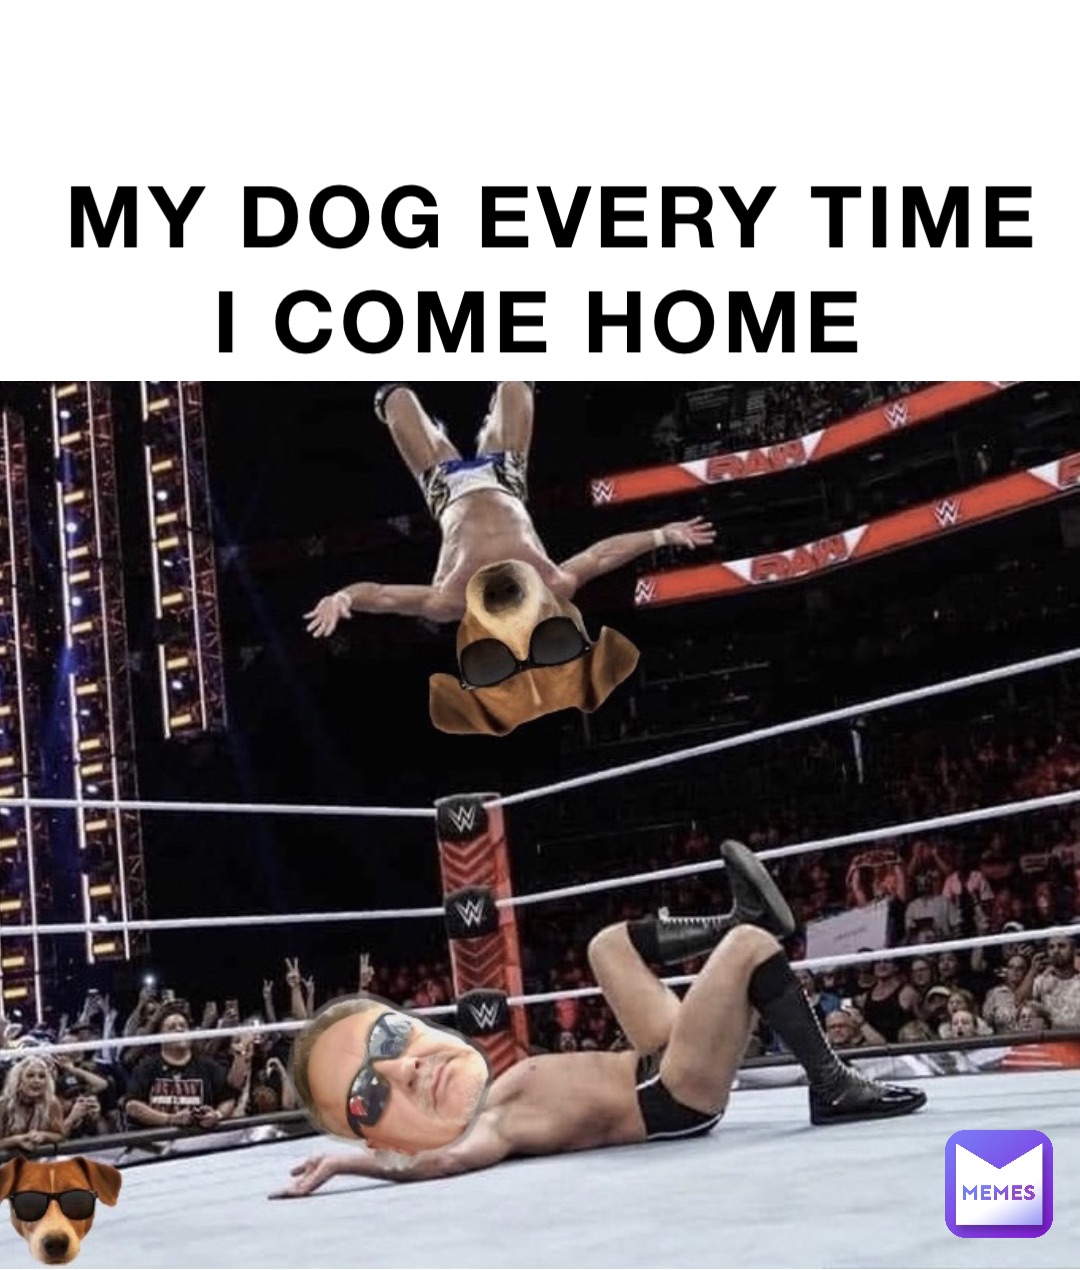 My dog every time I come home